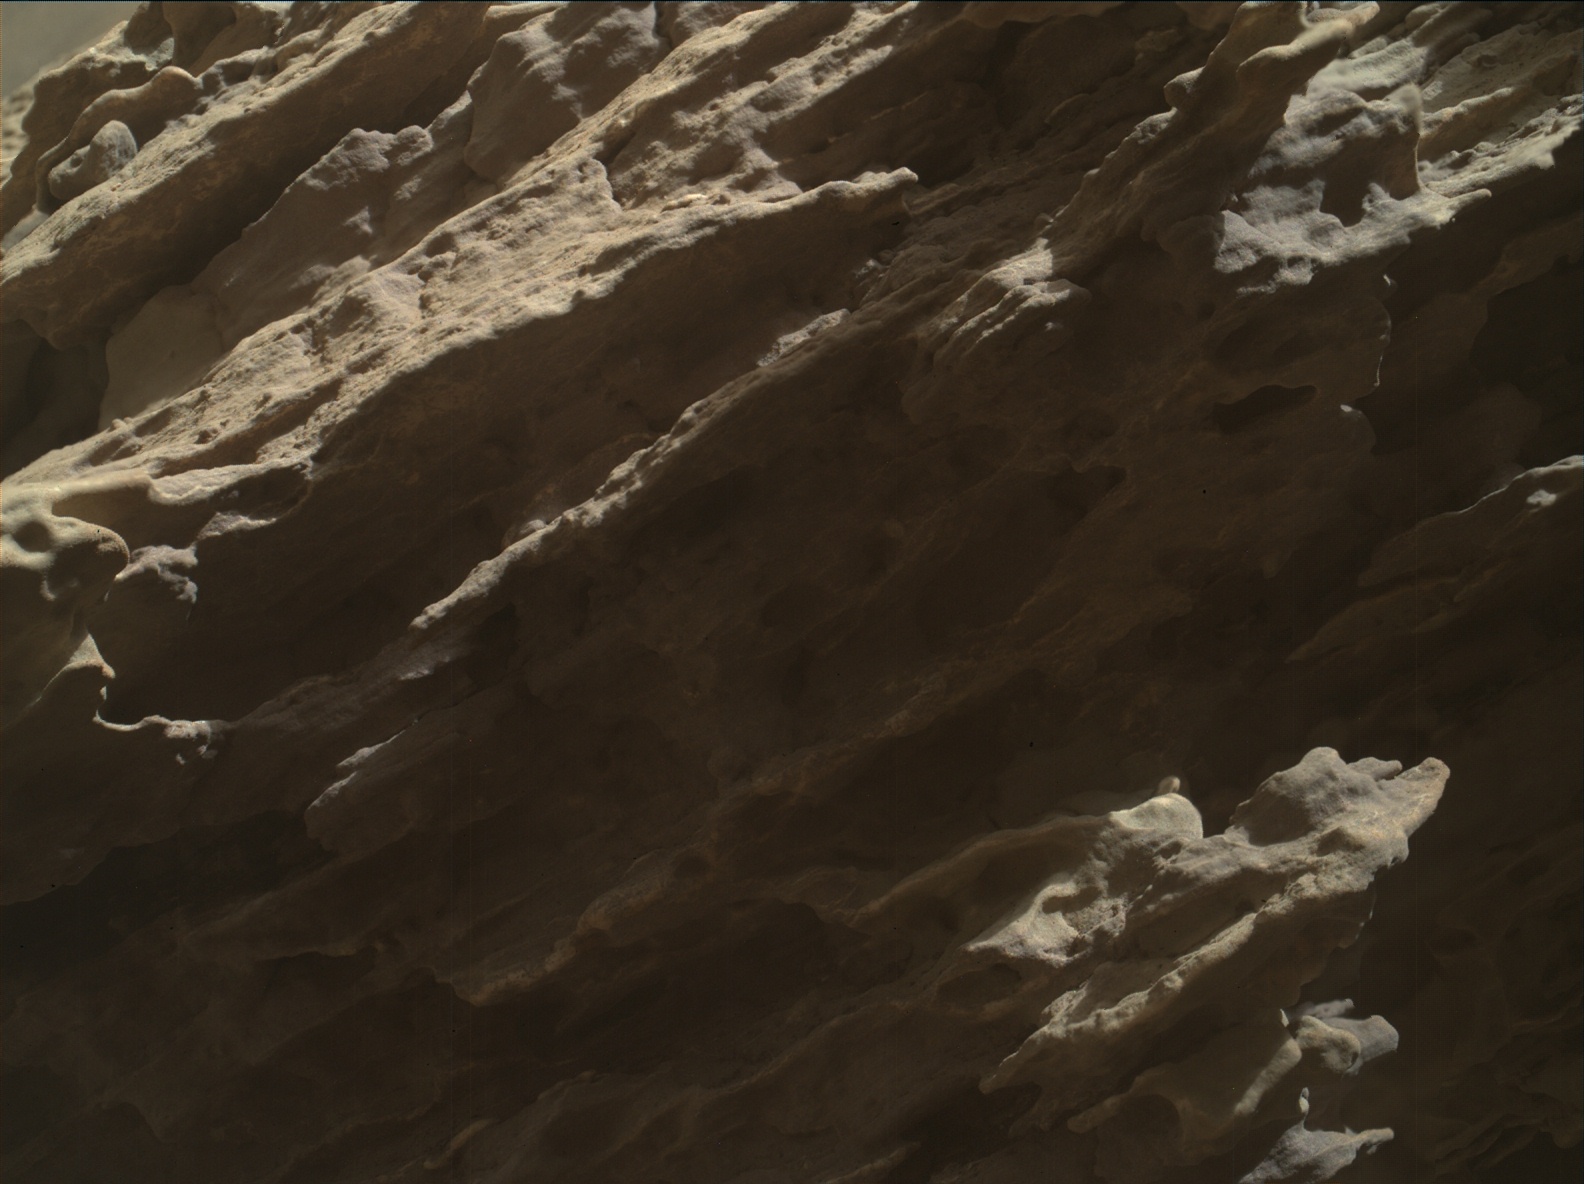 Nasa's Mars rover Curiosity acquired this image using its Mars Hand Lens Imager (MAHLI) on Sol 2609